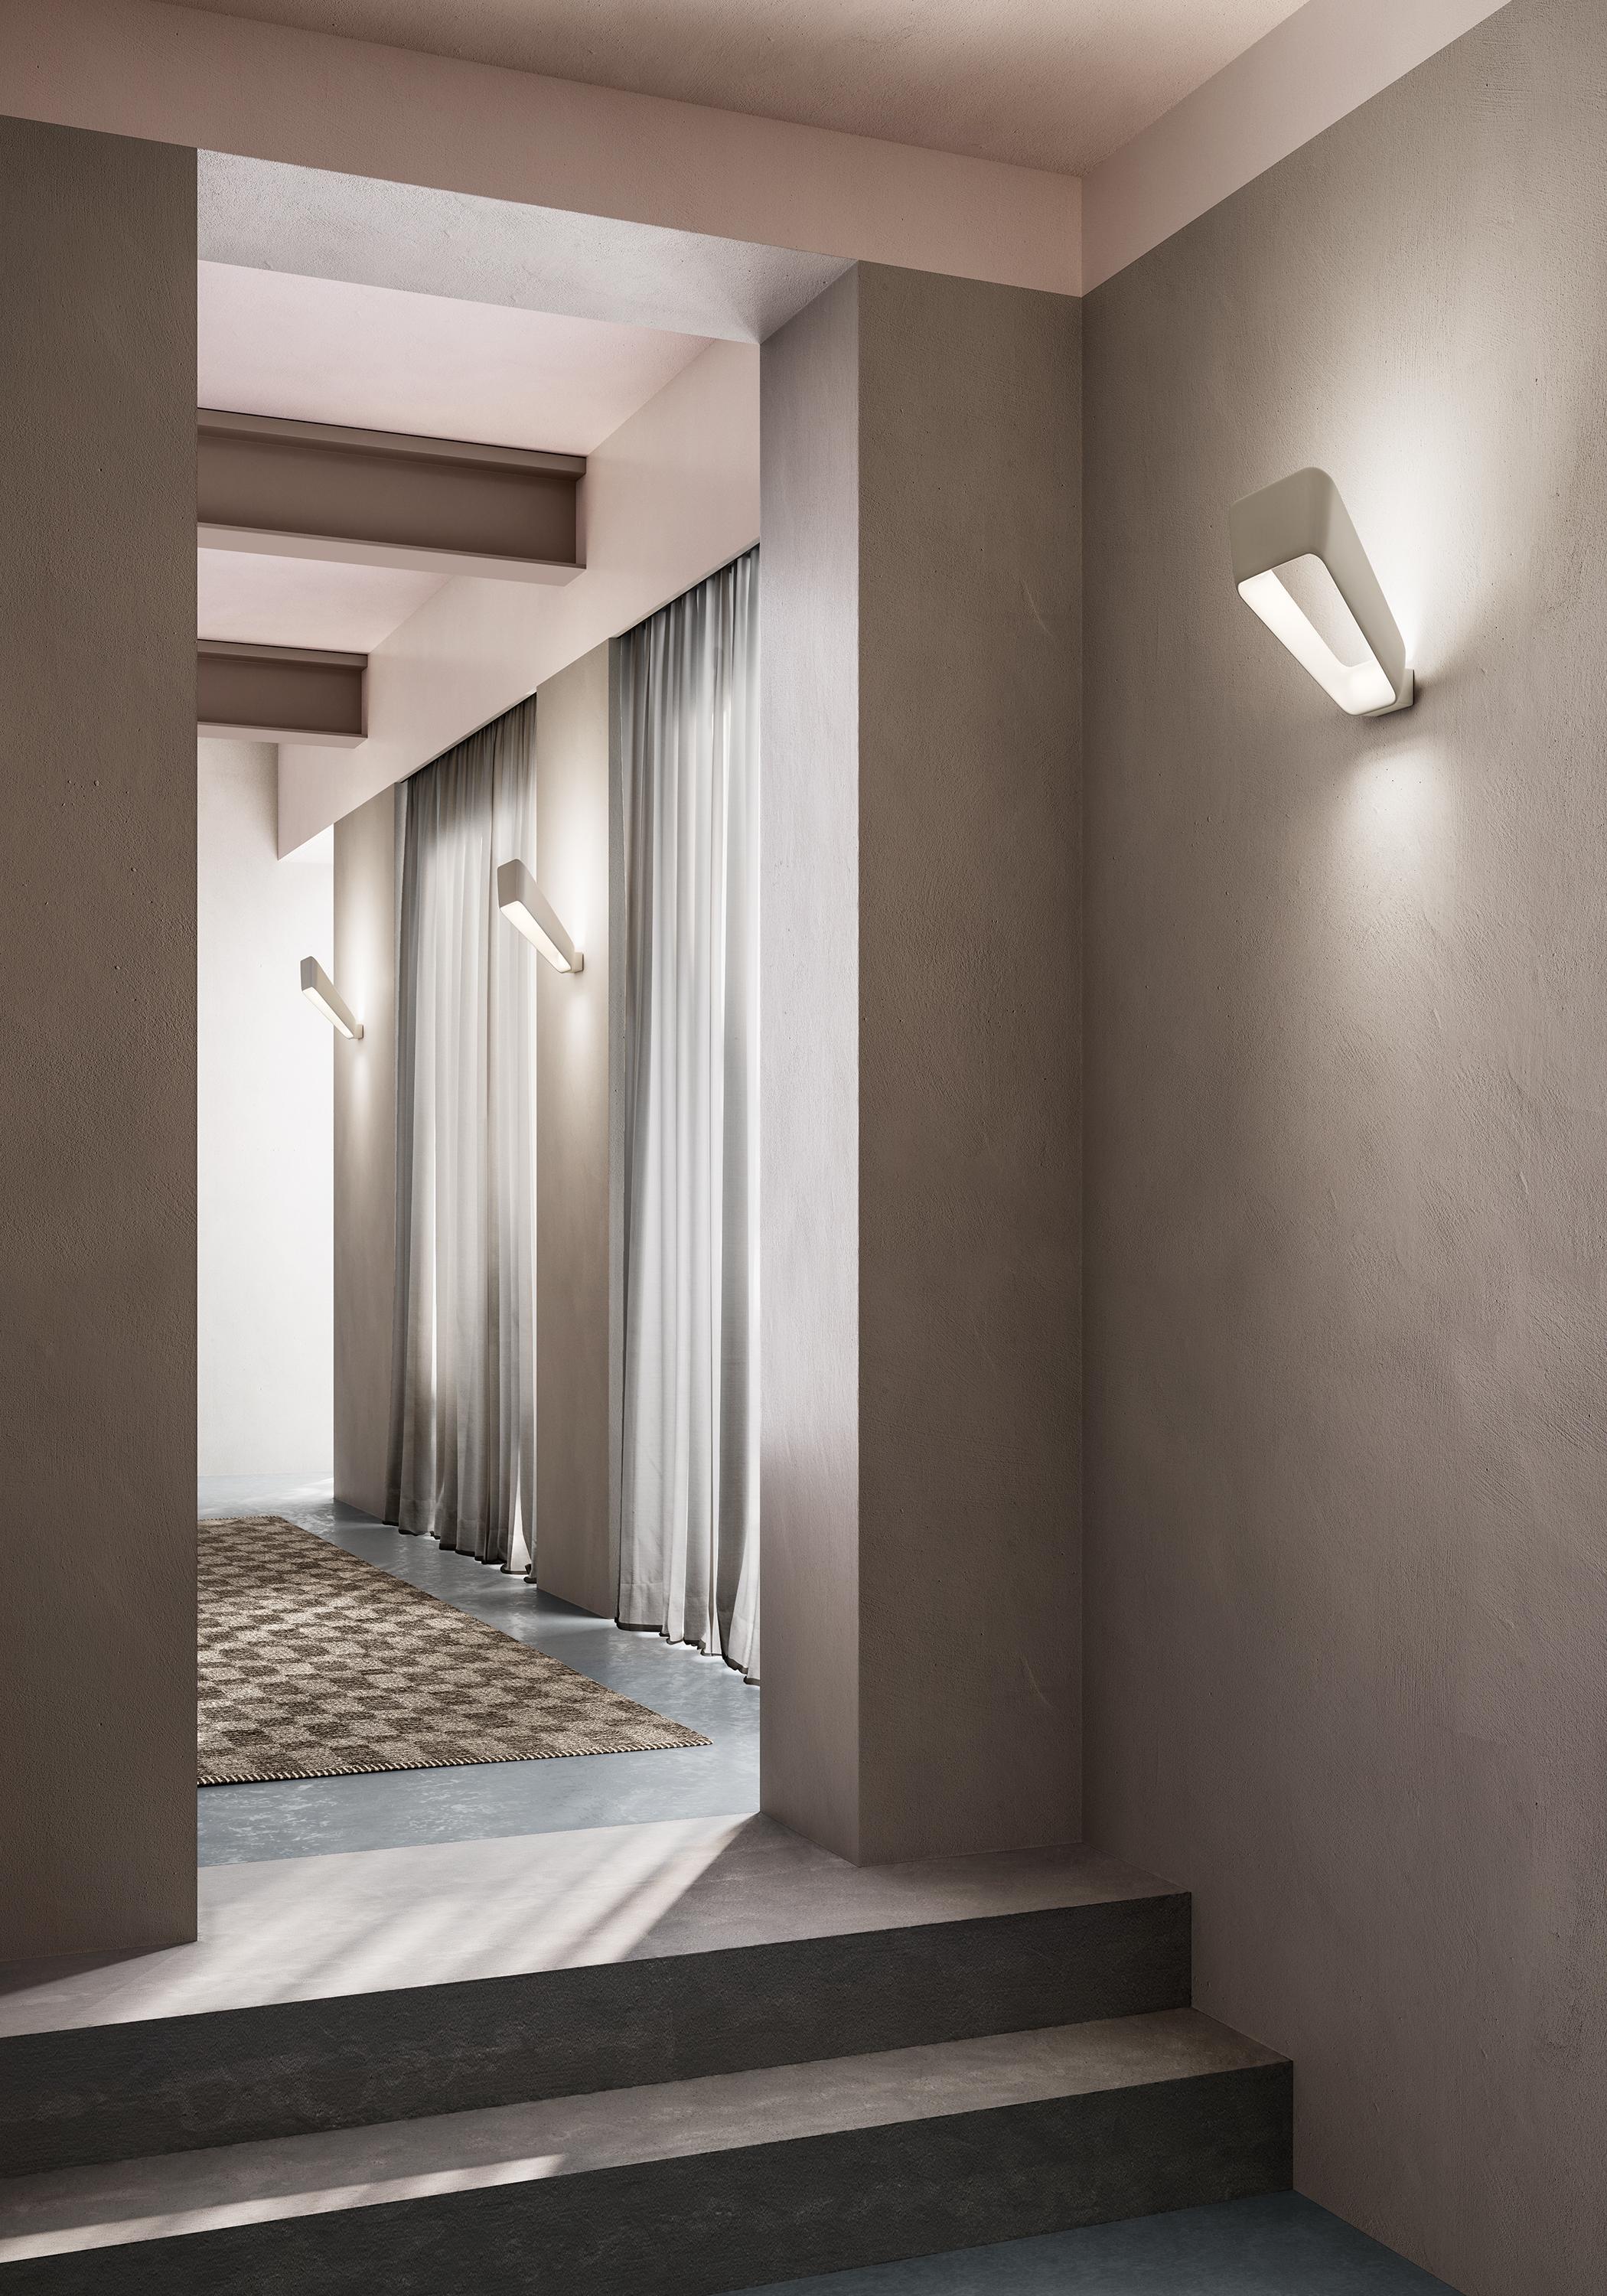 Frame white finish

Frame surrounds the light, diffusing it on the walls and enhancing it. Austere architectural design for a linear and compact wall light. Purity, solidity and lightness are the result of an extensive research project and